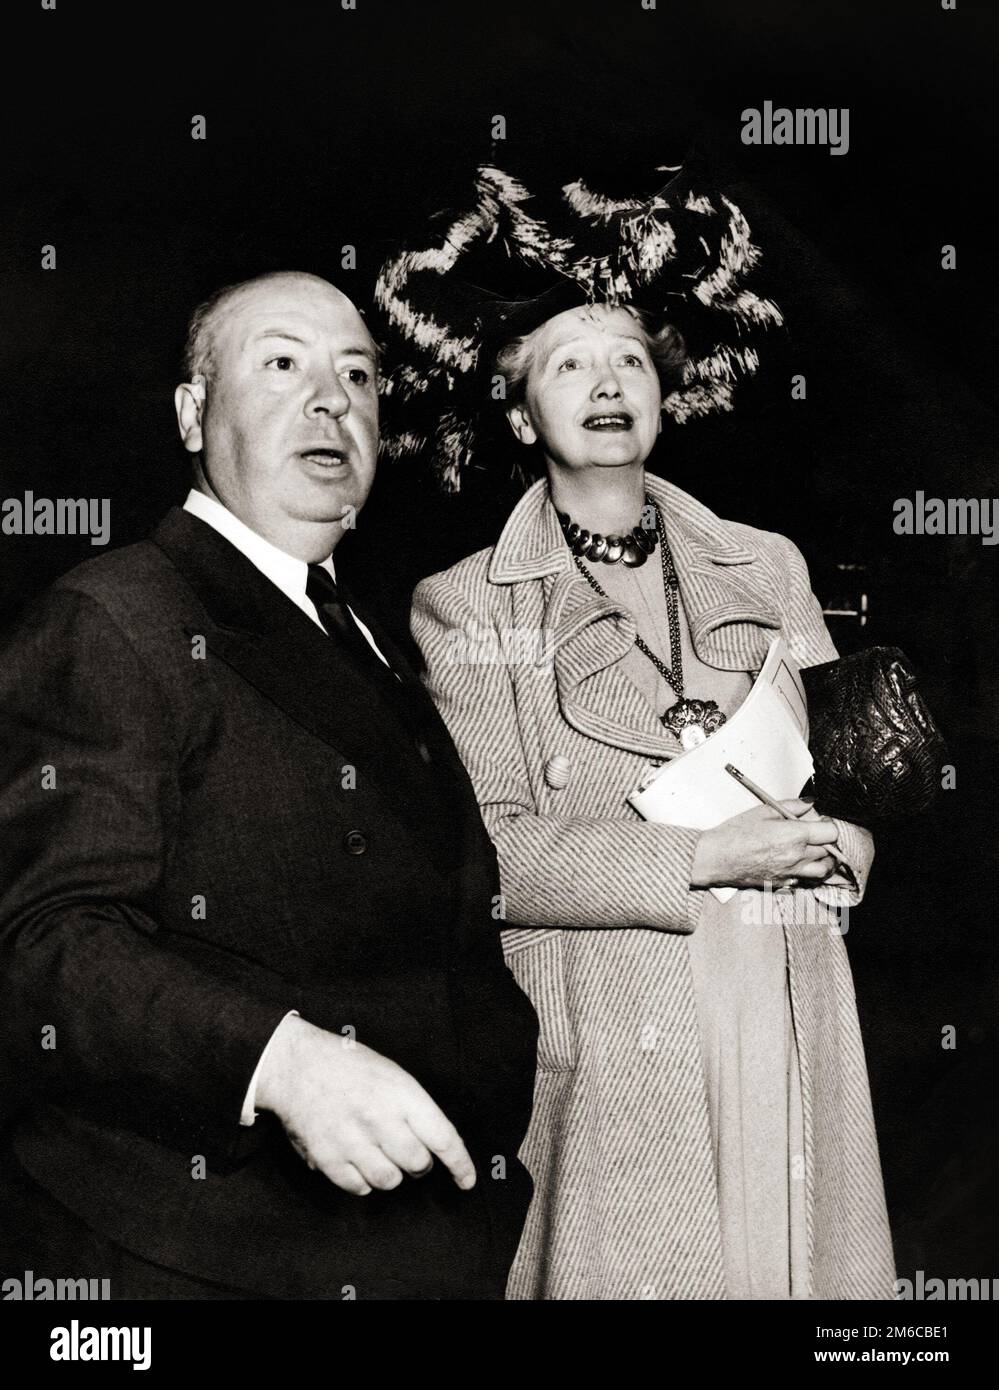 Alfred Hitchock with Hedda Hopper (1940s) Stock Photo